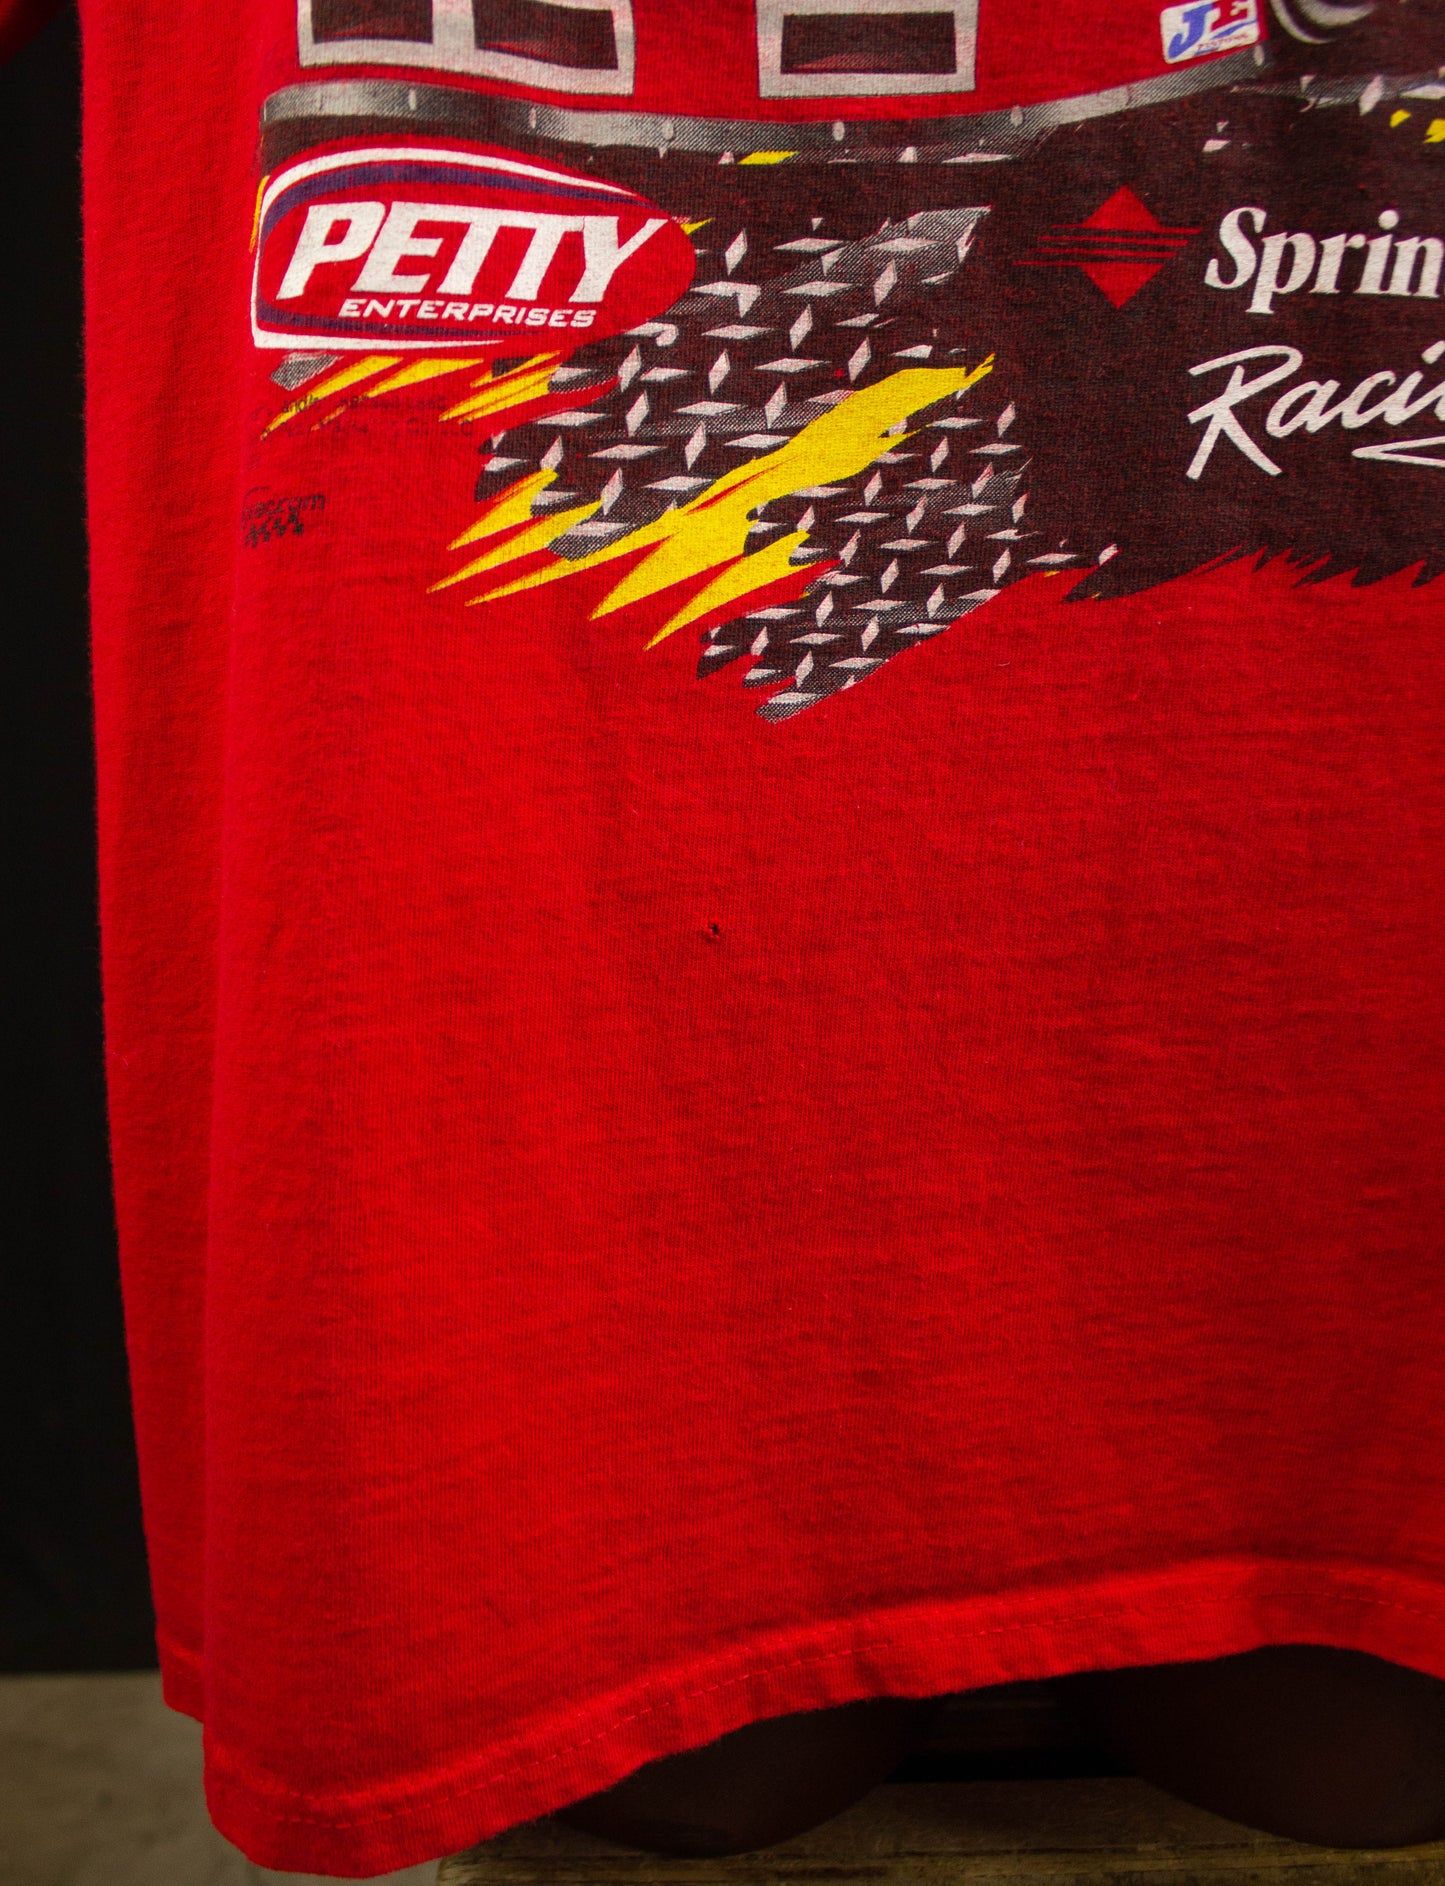 Vintage Kyle Petty Sprint Racing NASCAR Graphic T Shirt 1999 Red and Yellow XL